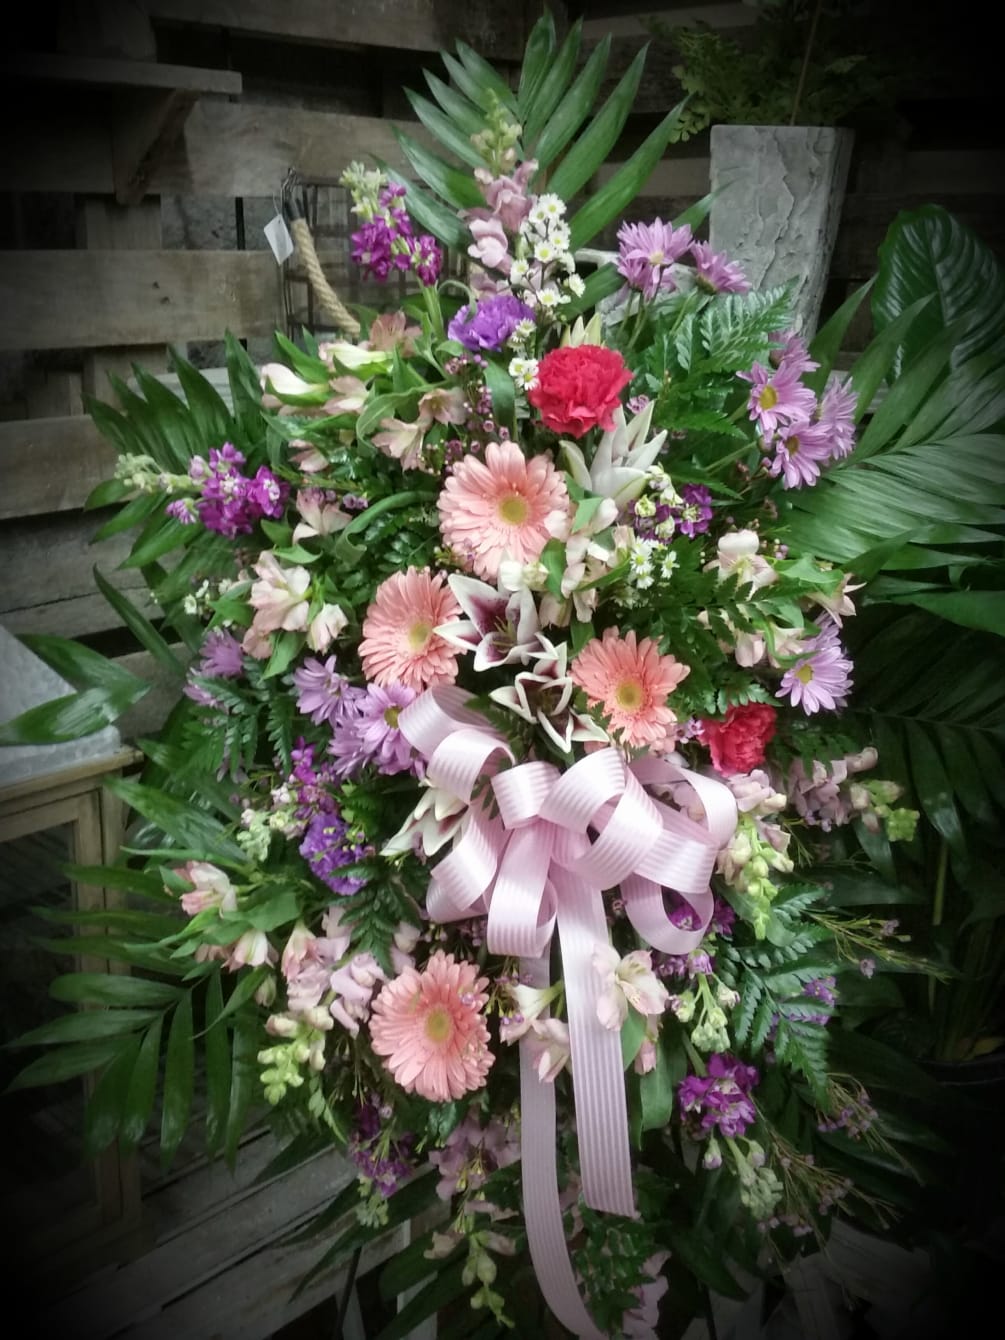 A pastel mix of lavenders and pinks to include gerbera daisies, stock